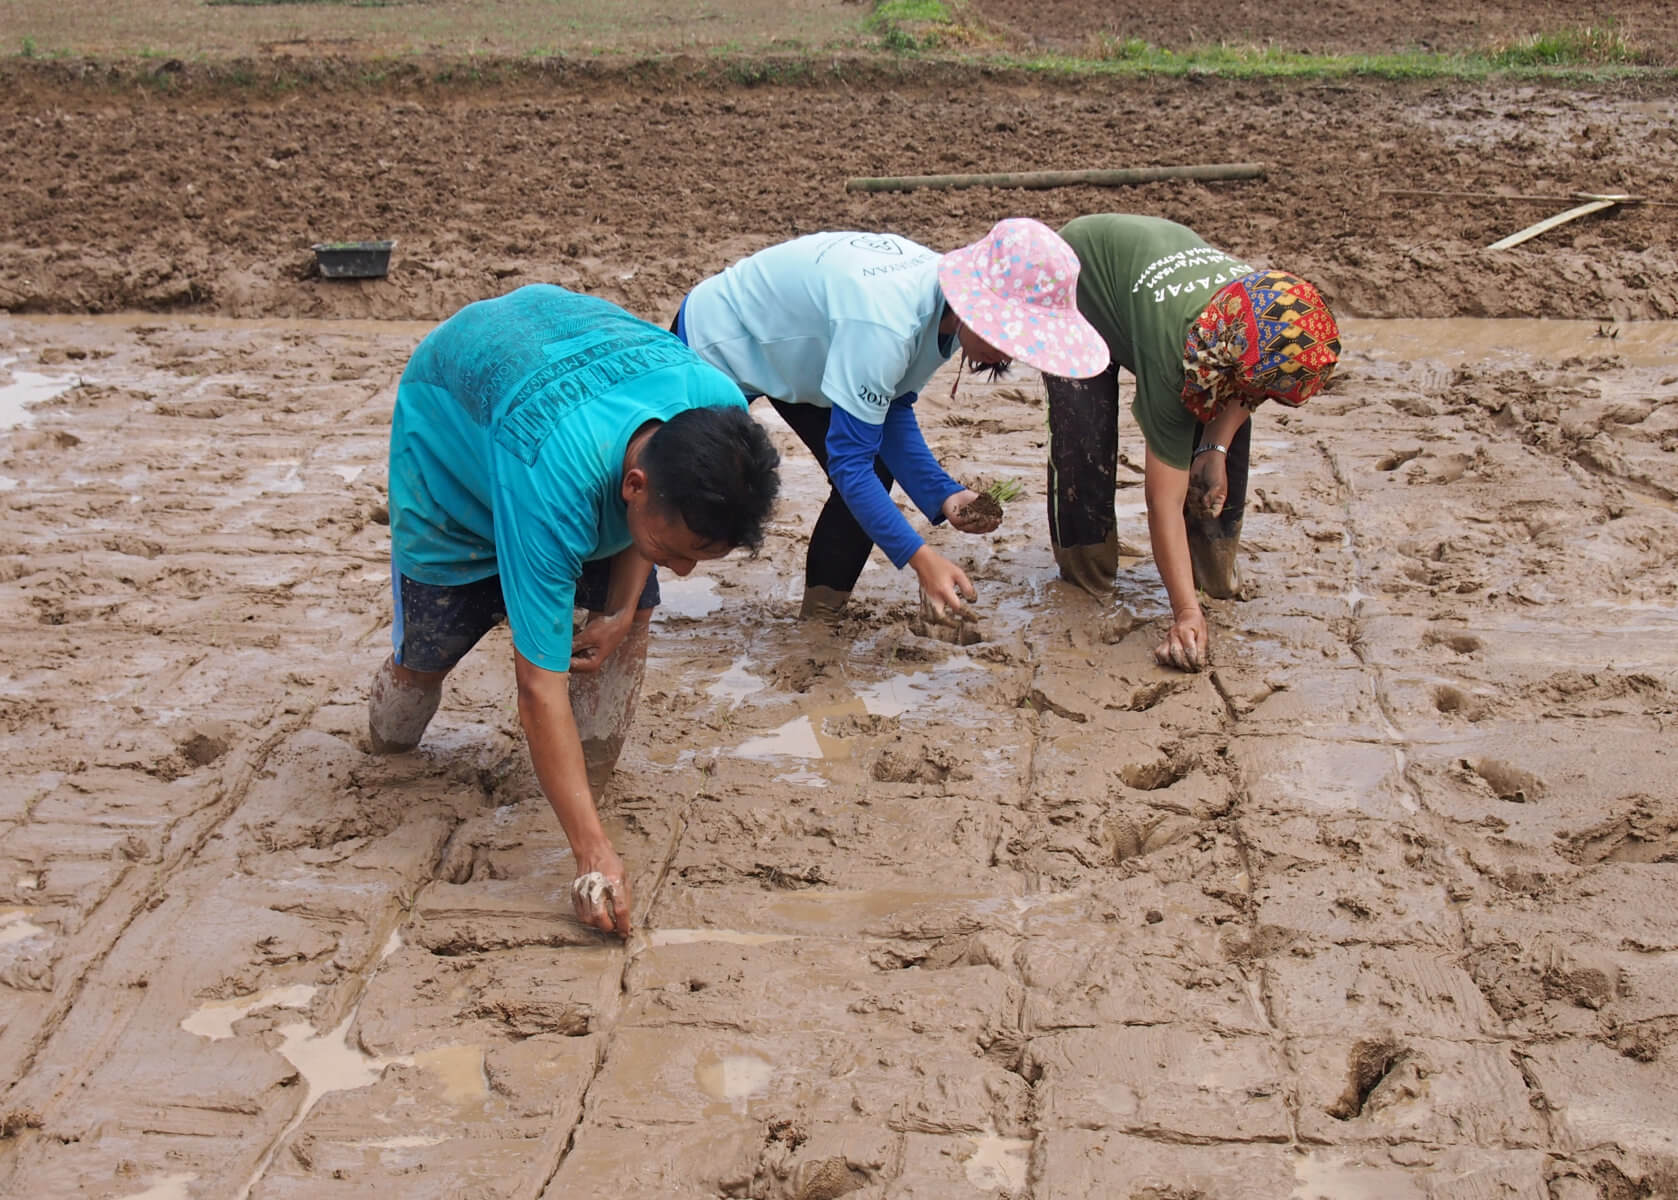 Rice planting in Borneo. Photo by E. Gasiunaite